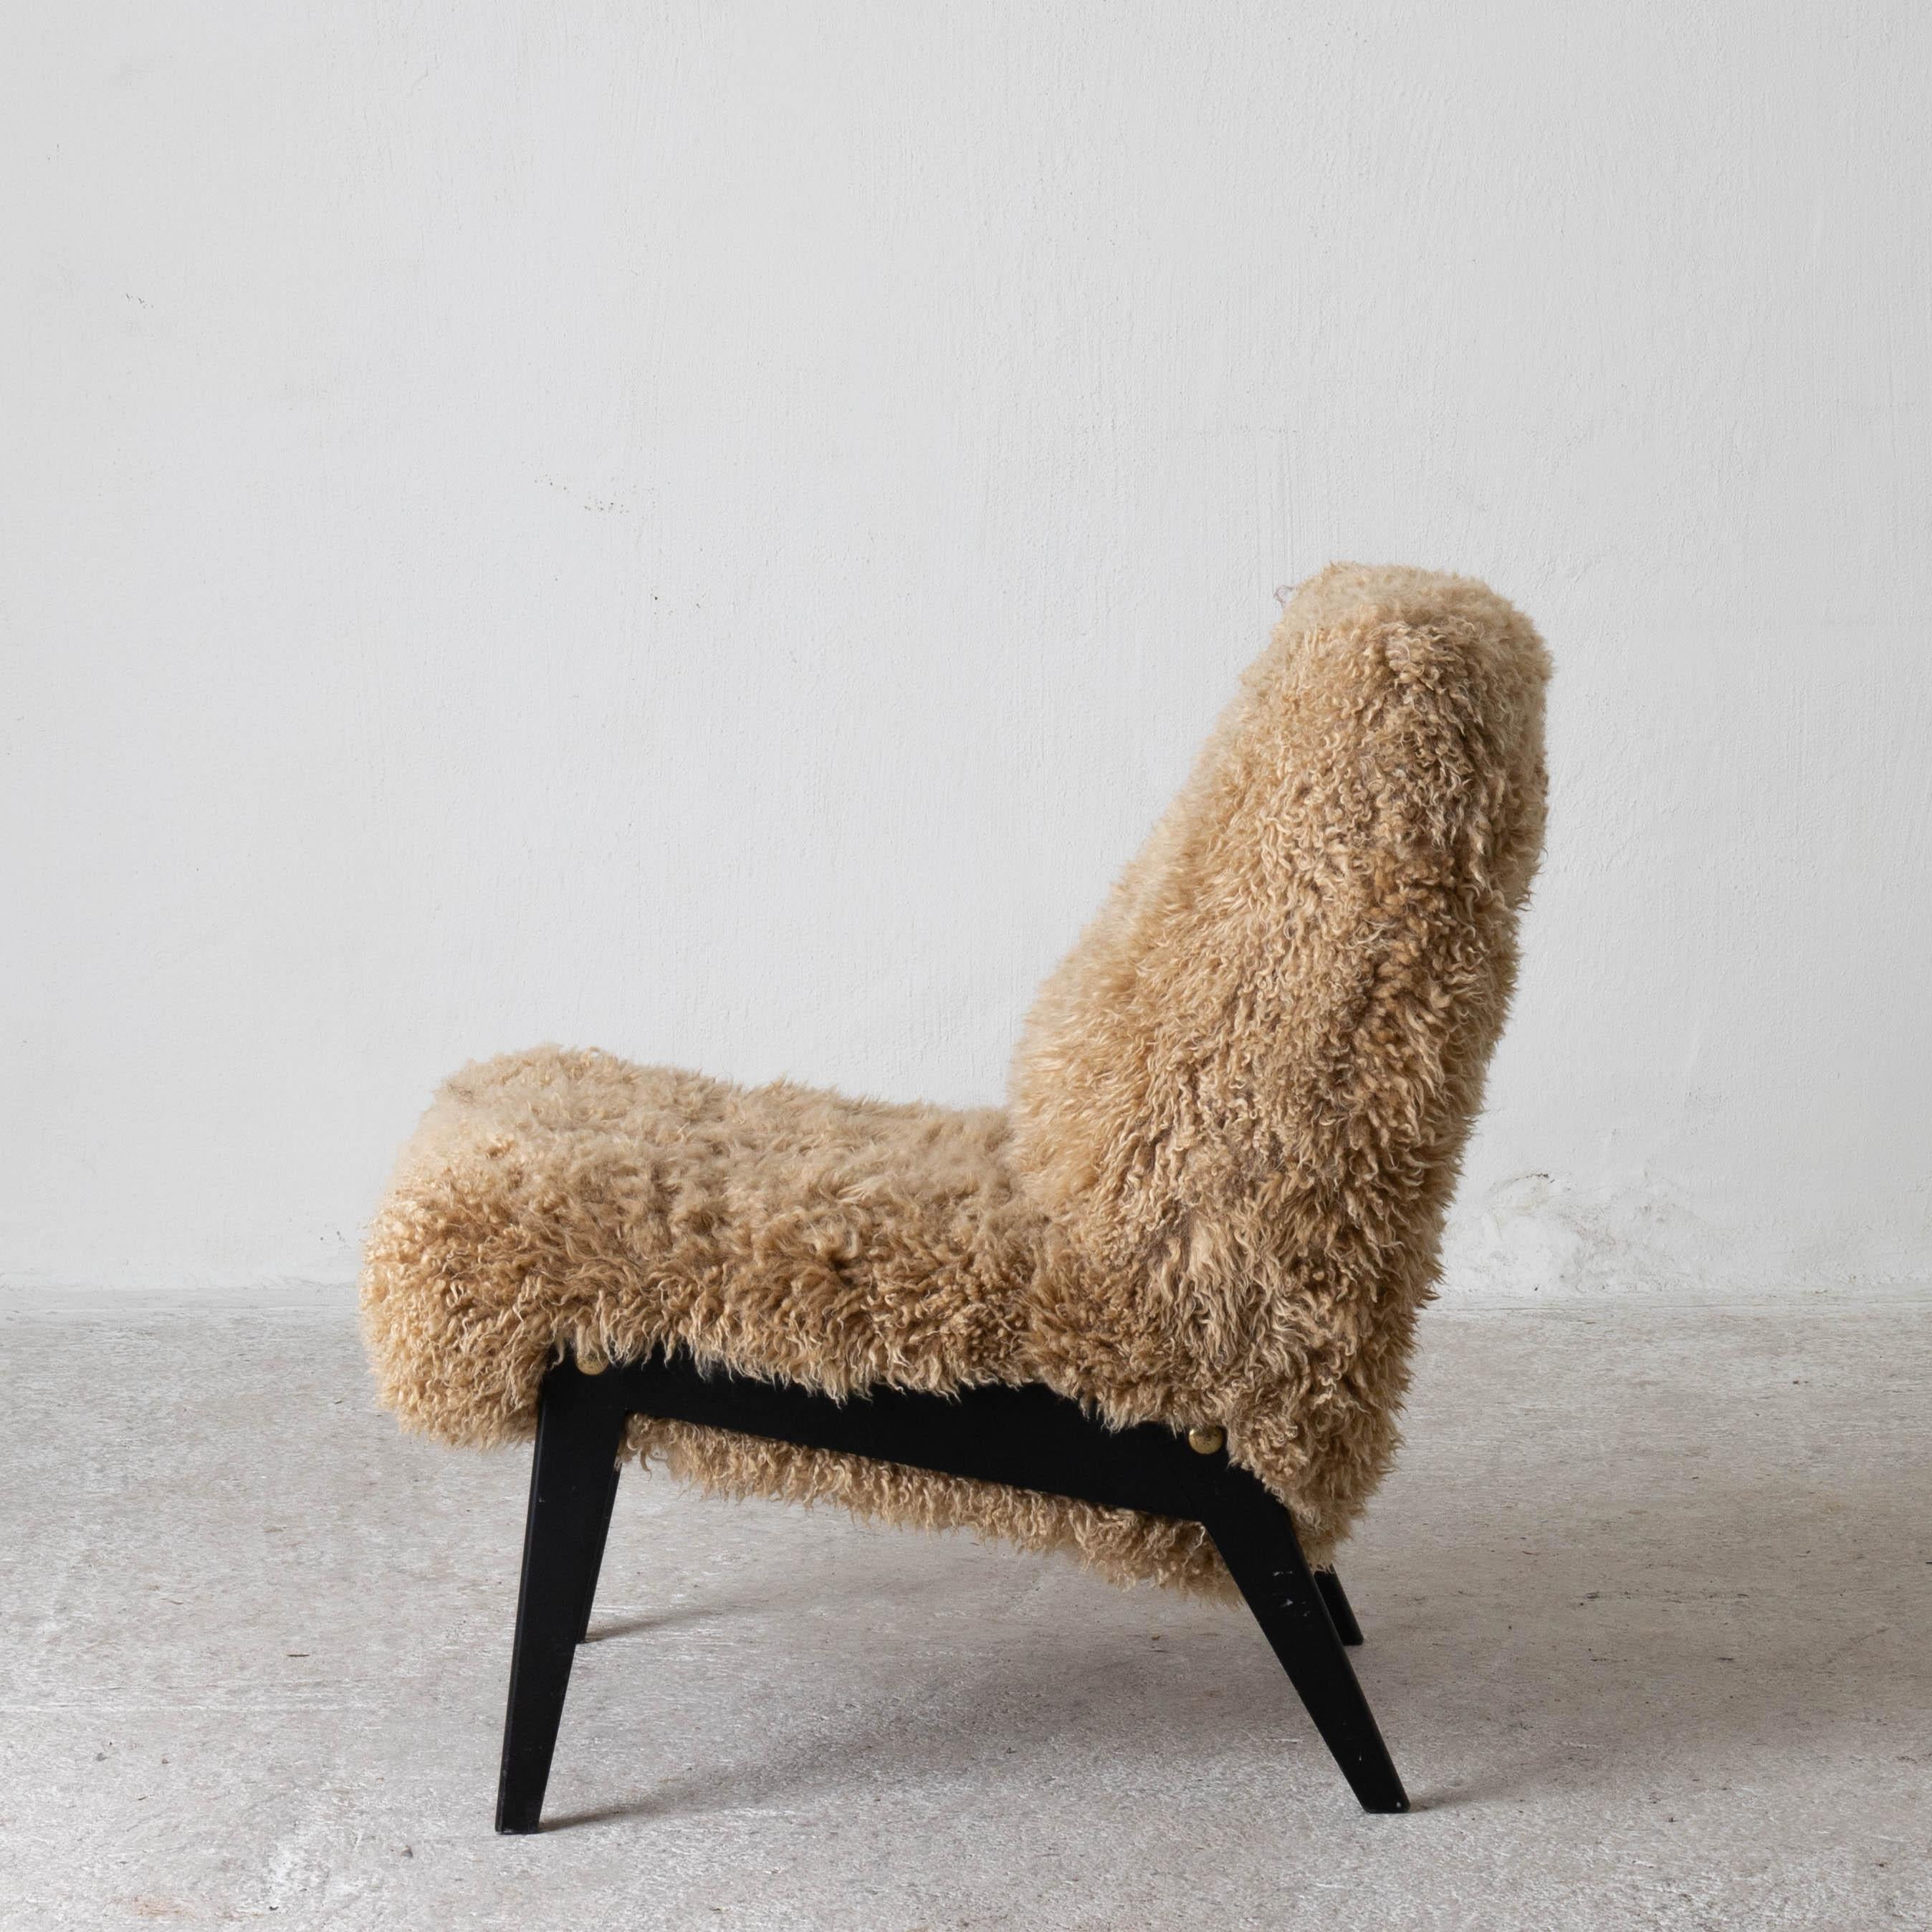 Chair Swedish Nordiska Kompaniet 20th century fur beige, Sweden. A lounge chair made during the 20th century by in Sweden. Reupholstered in a long haired golden colored fur. Black legs with brass screws.